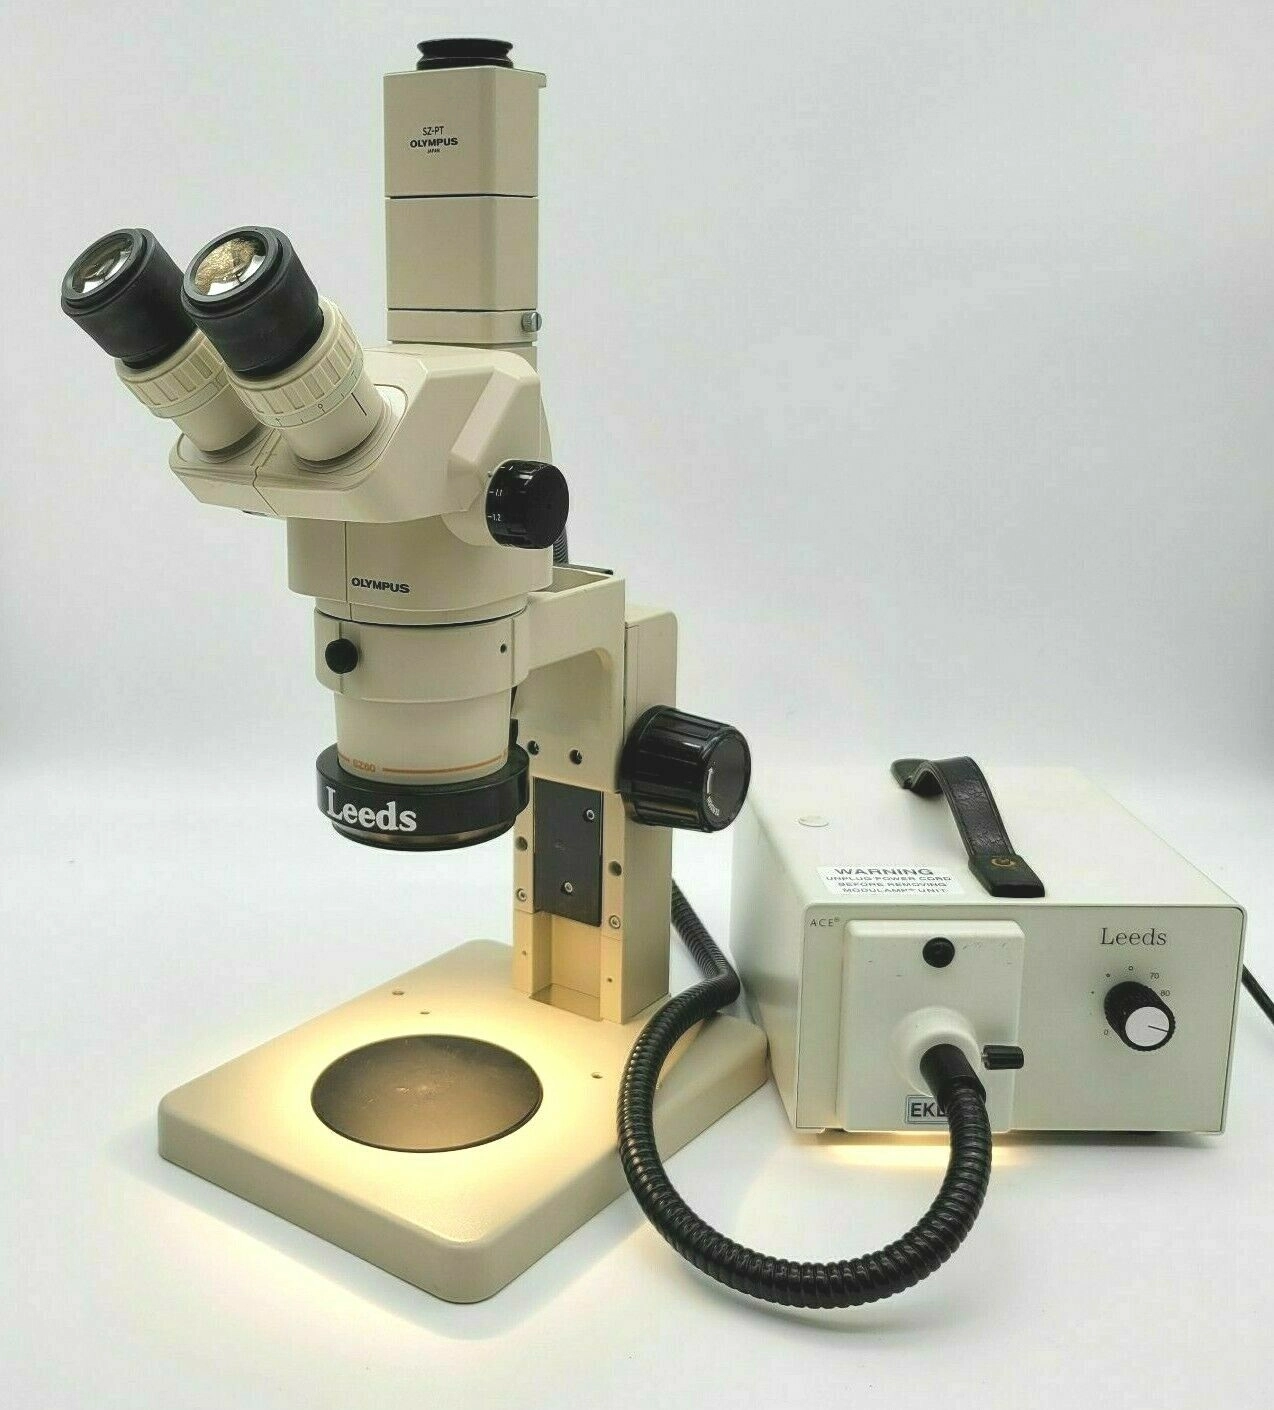 Olympus Stereo Microscope SZ60 with Phototube and Leeds Ring Light